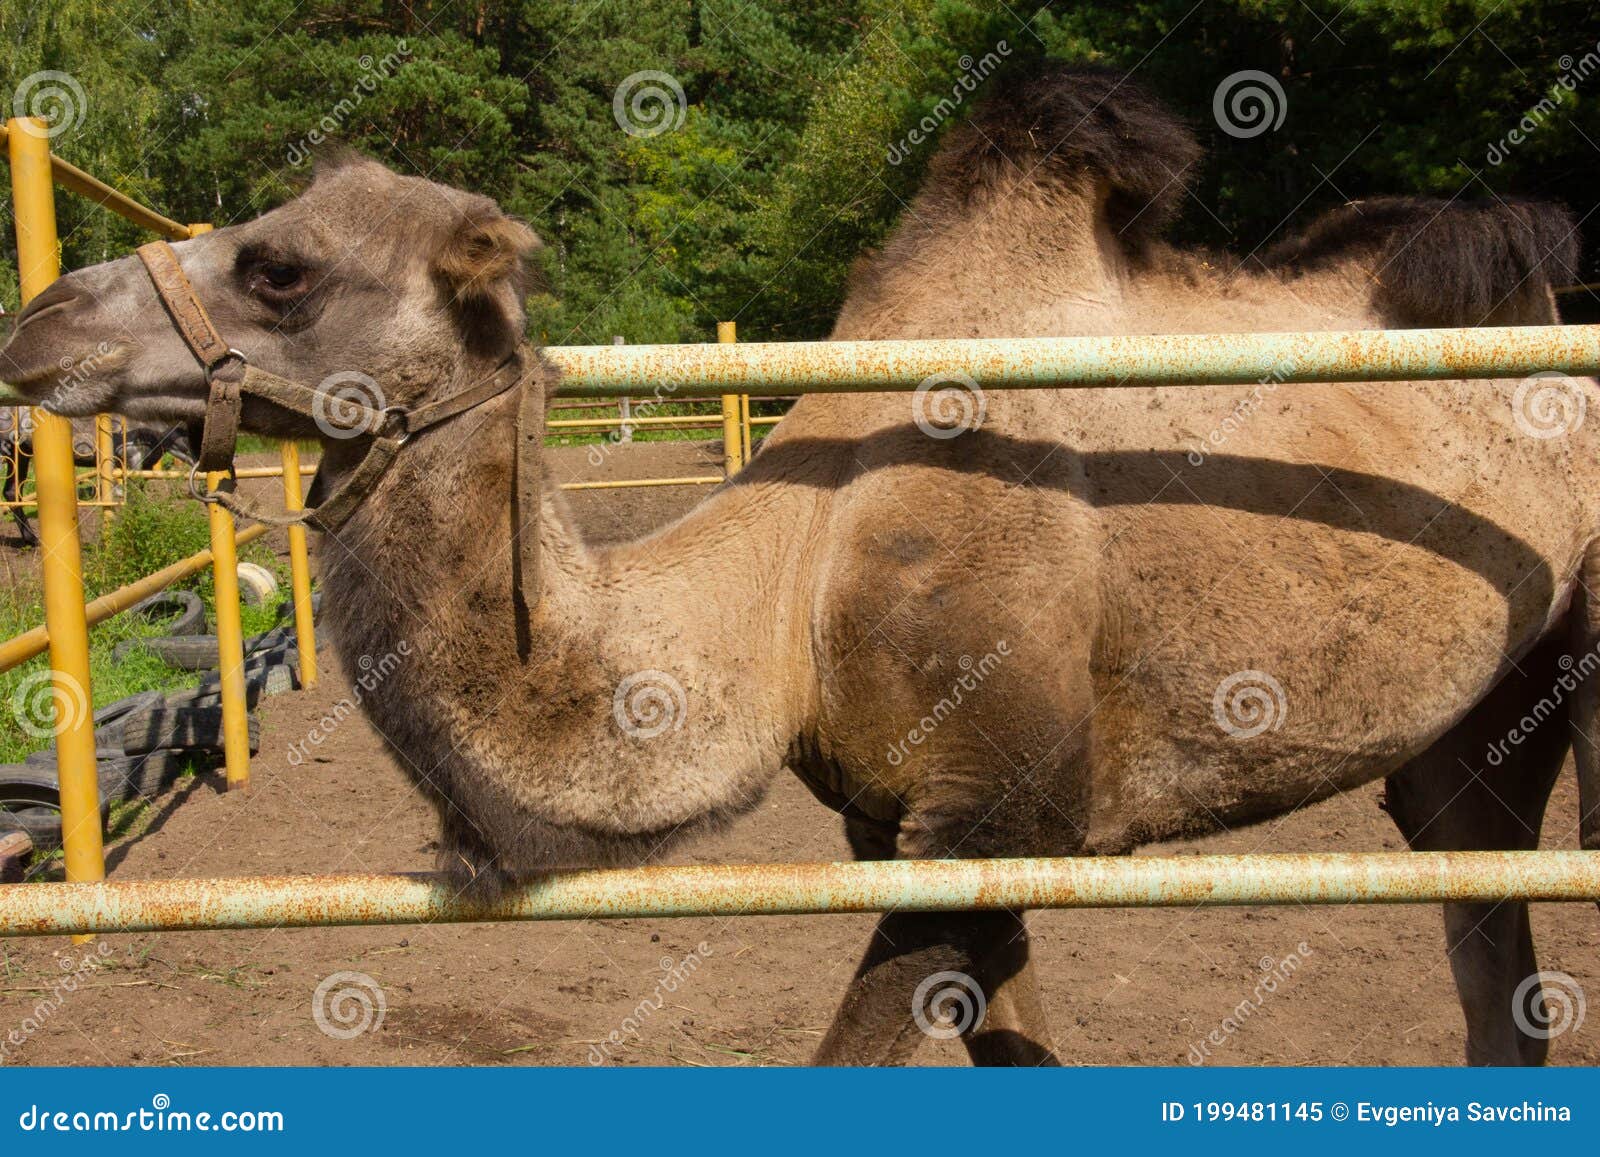 Camel in a Paddock on a Farm. Wild Animal Locked Up, Stock Image - Image of  outdoor, zoology: 199481145